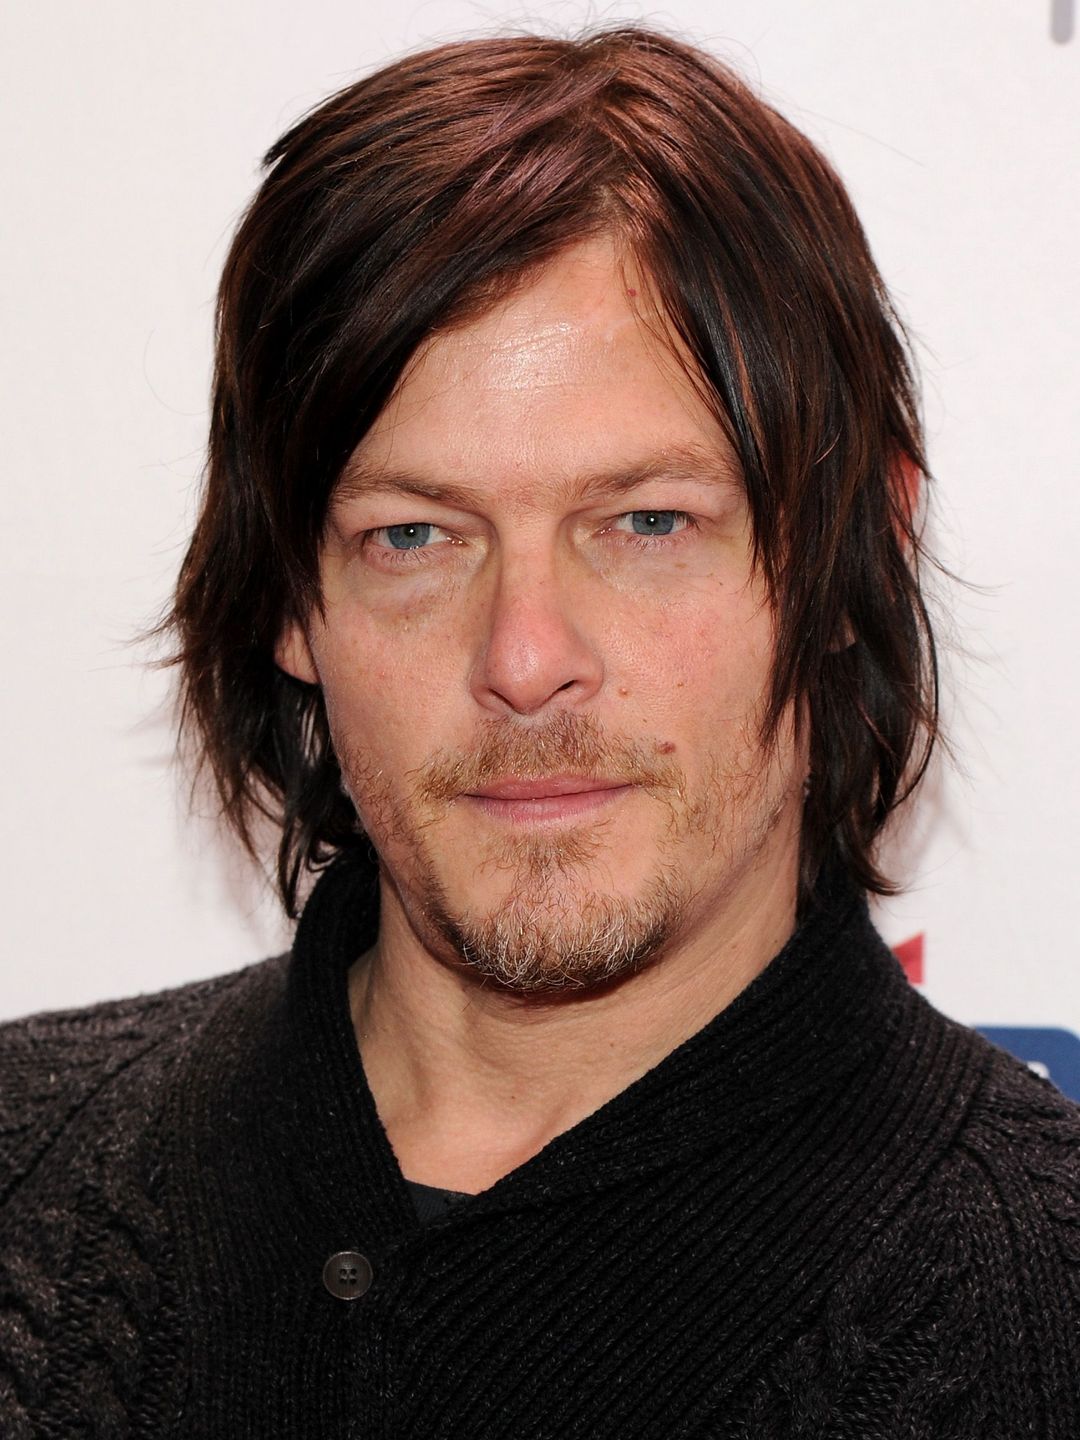 Norman Reedus personal life